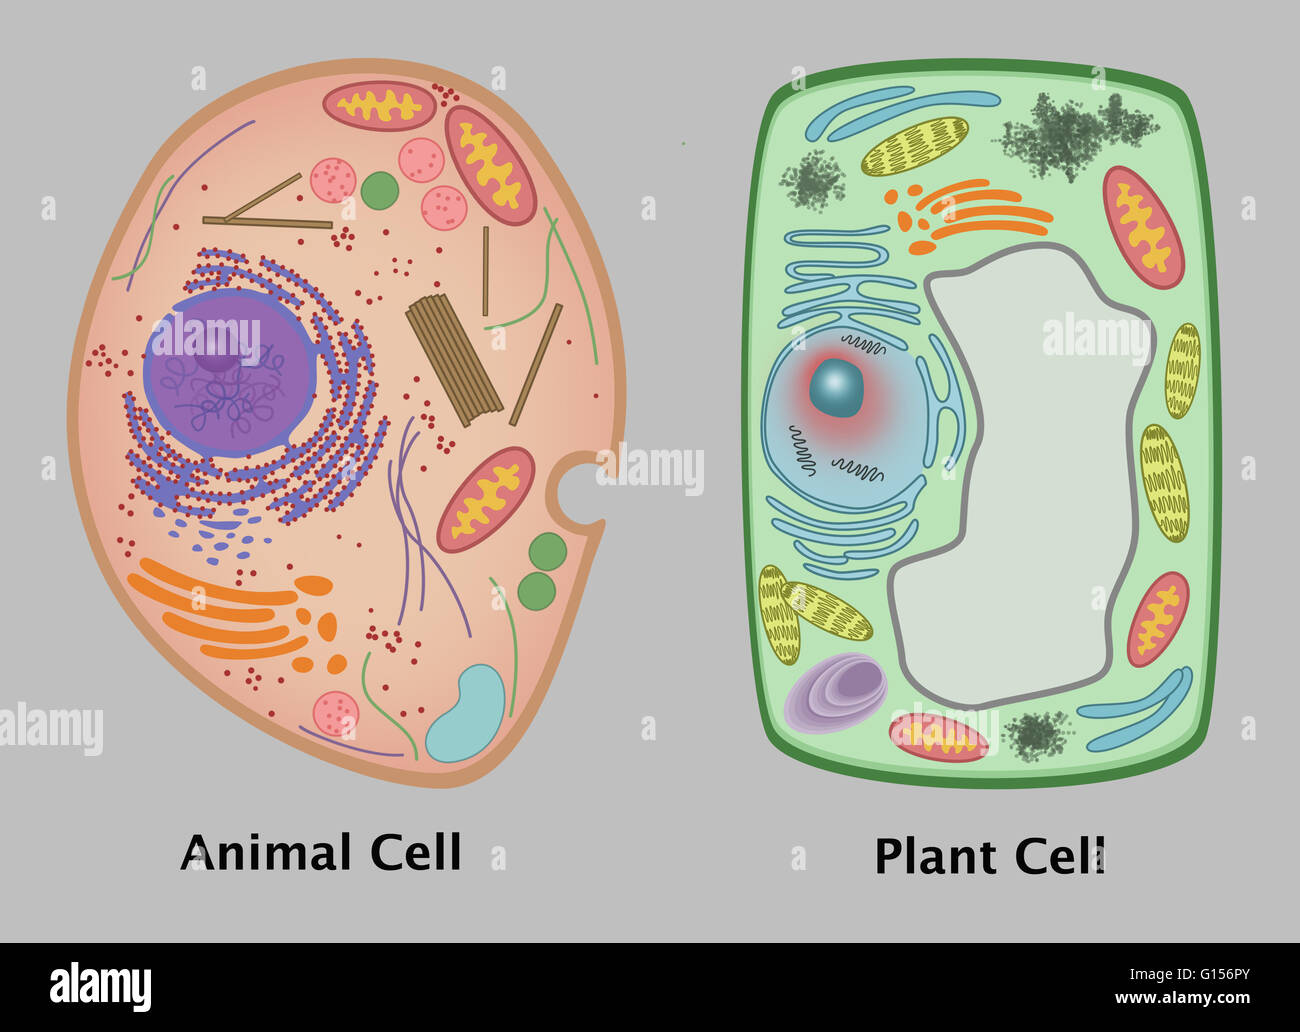 An Illustration comparing an animal cell and plant cell. Stock Photo